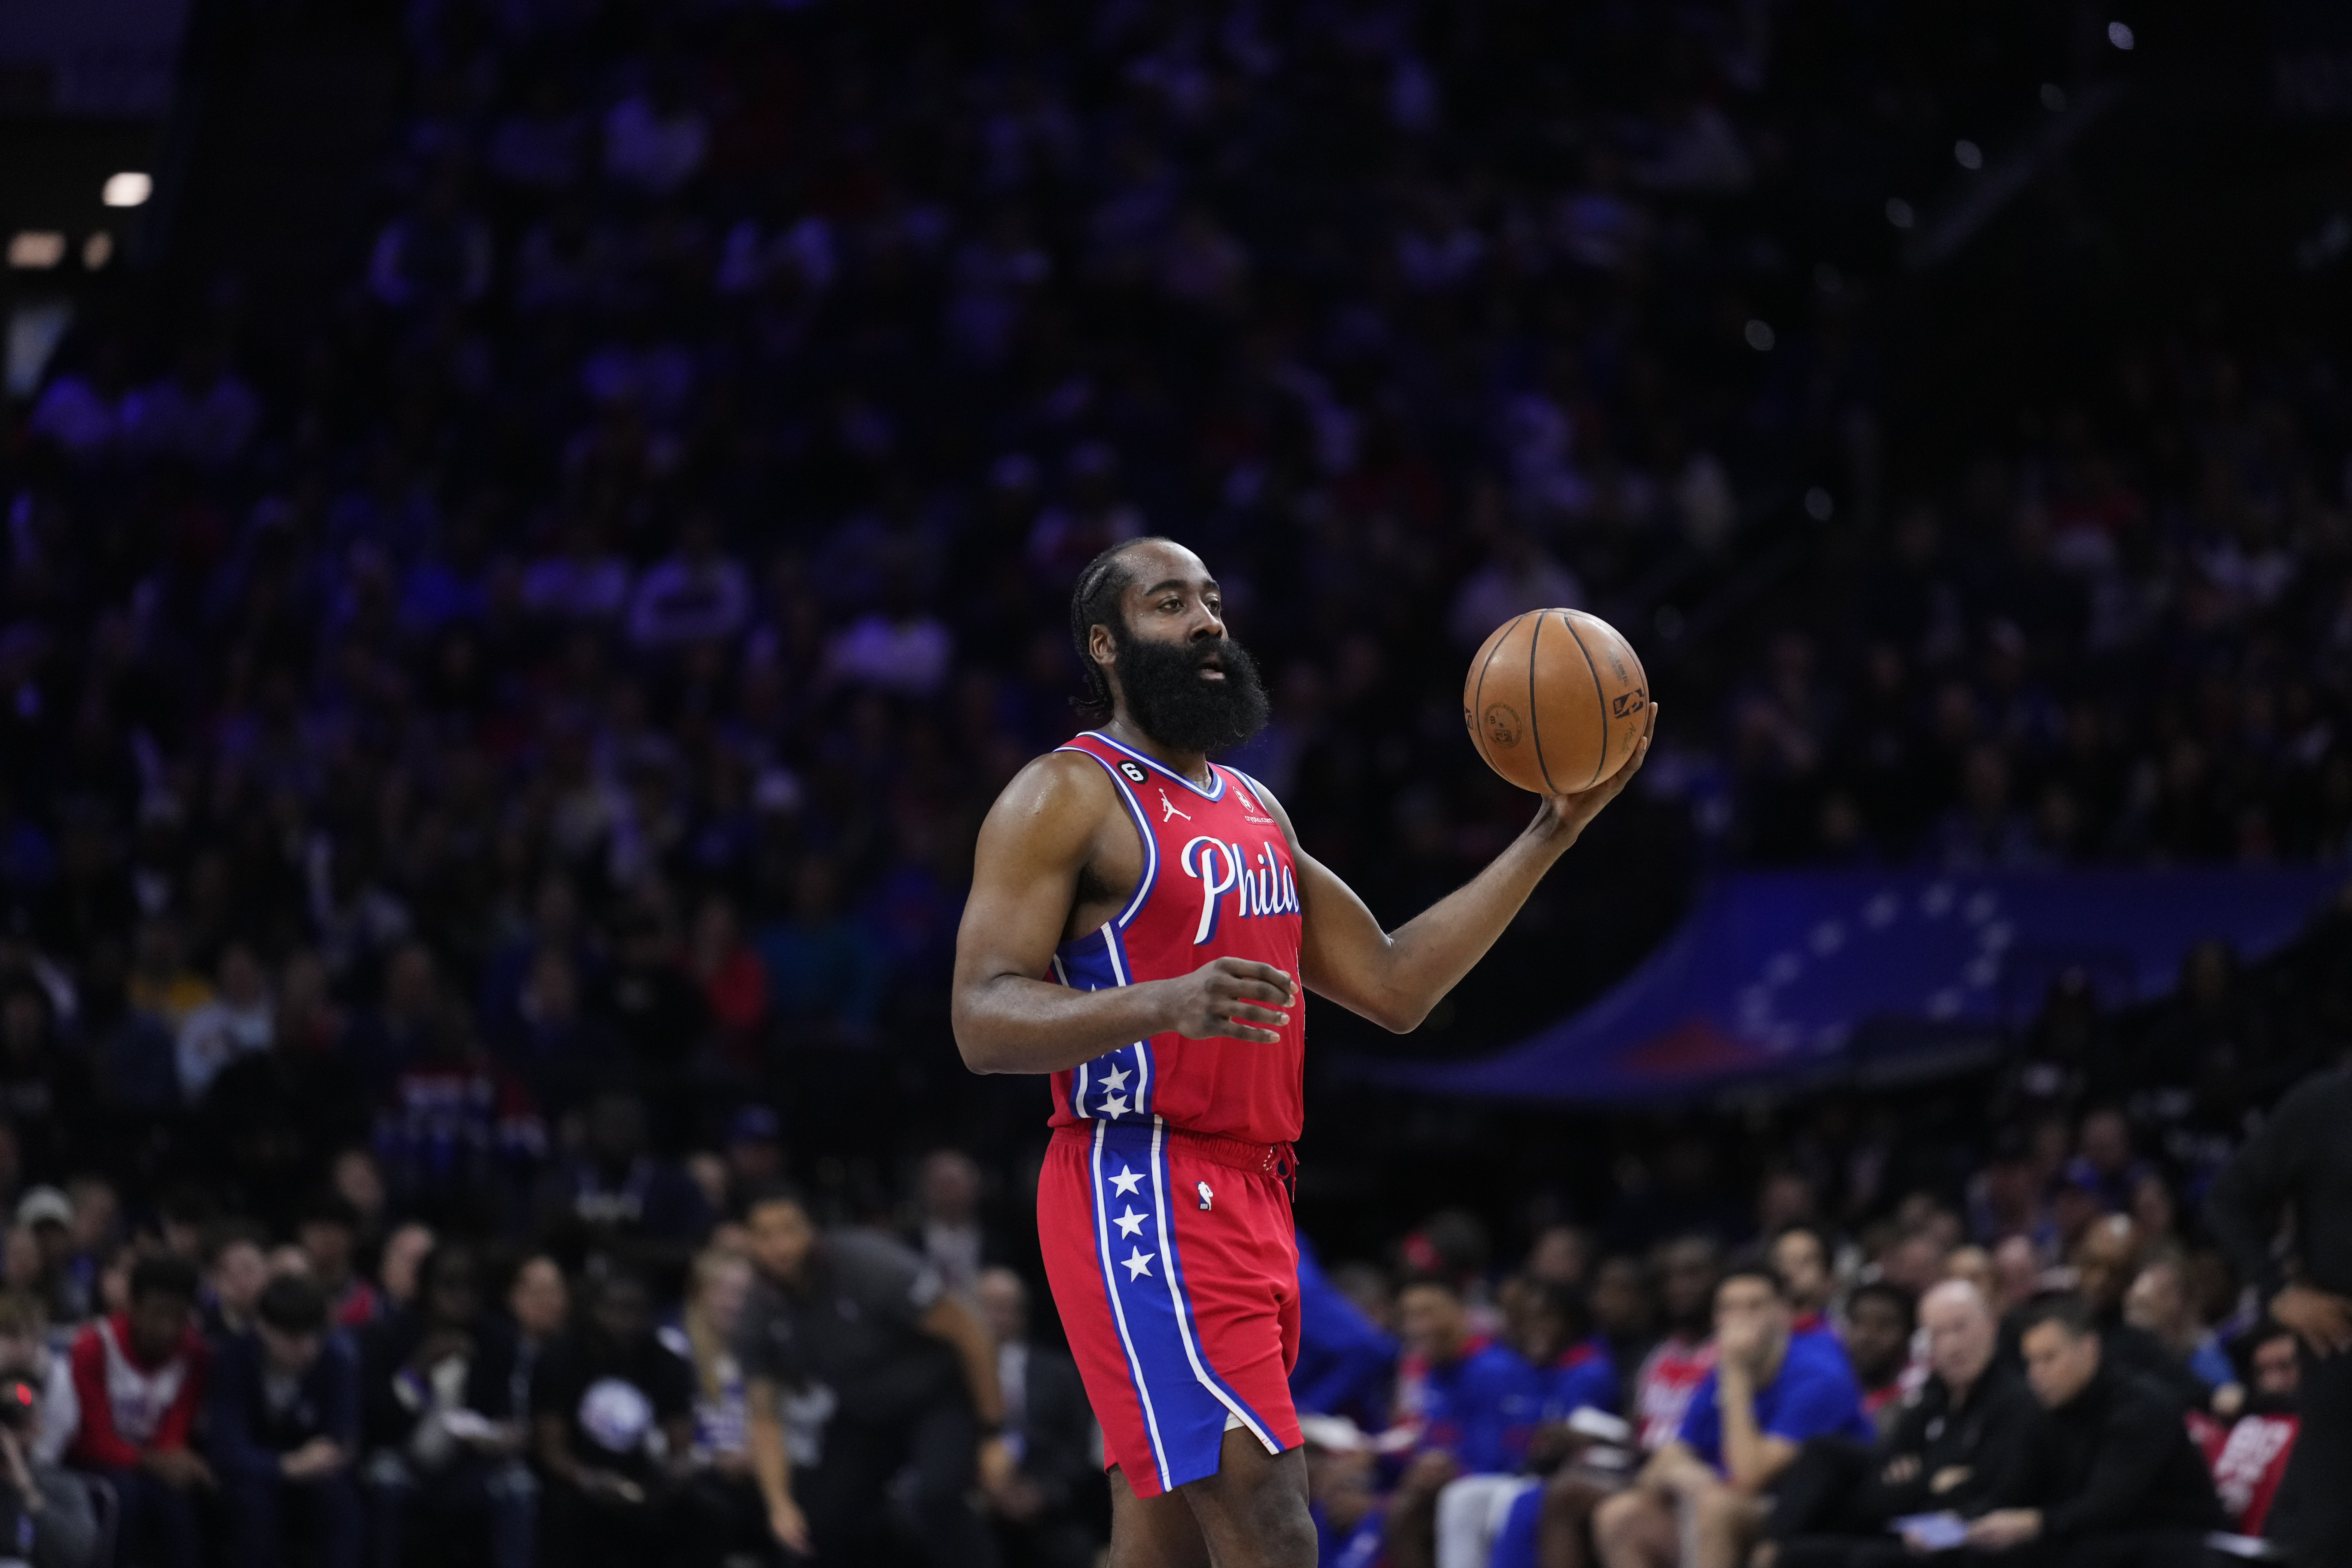 76ers vs. Clippers prediction, betting odds for NBA on Tuesday 